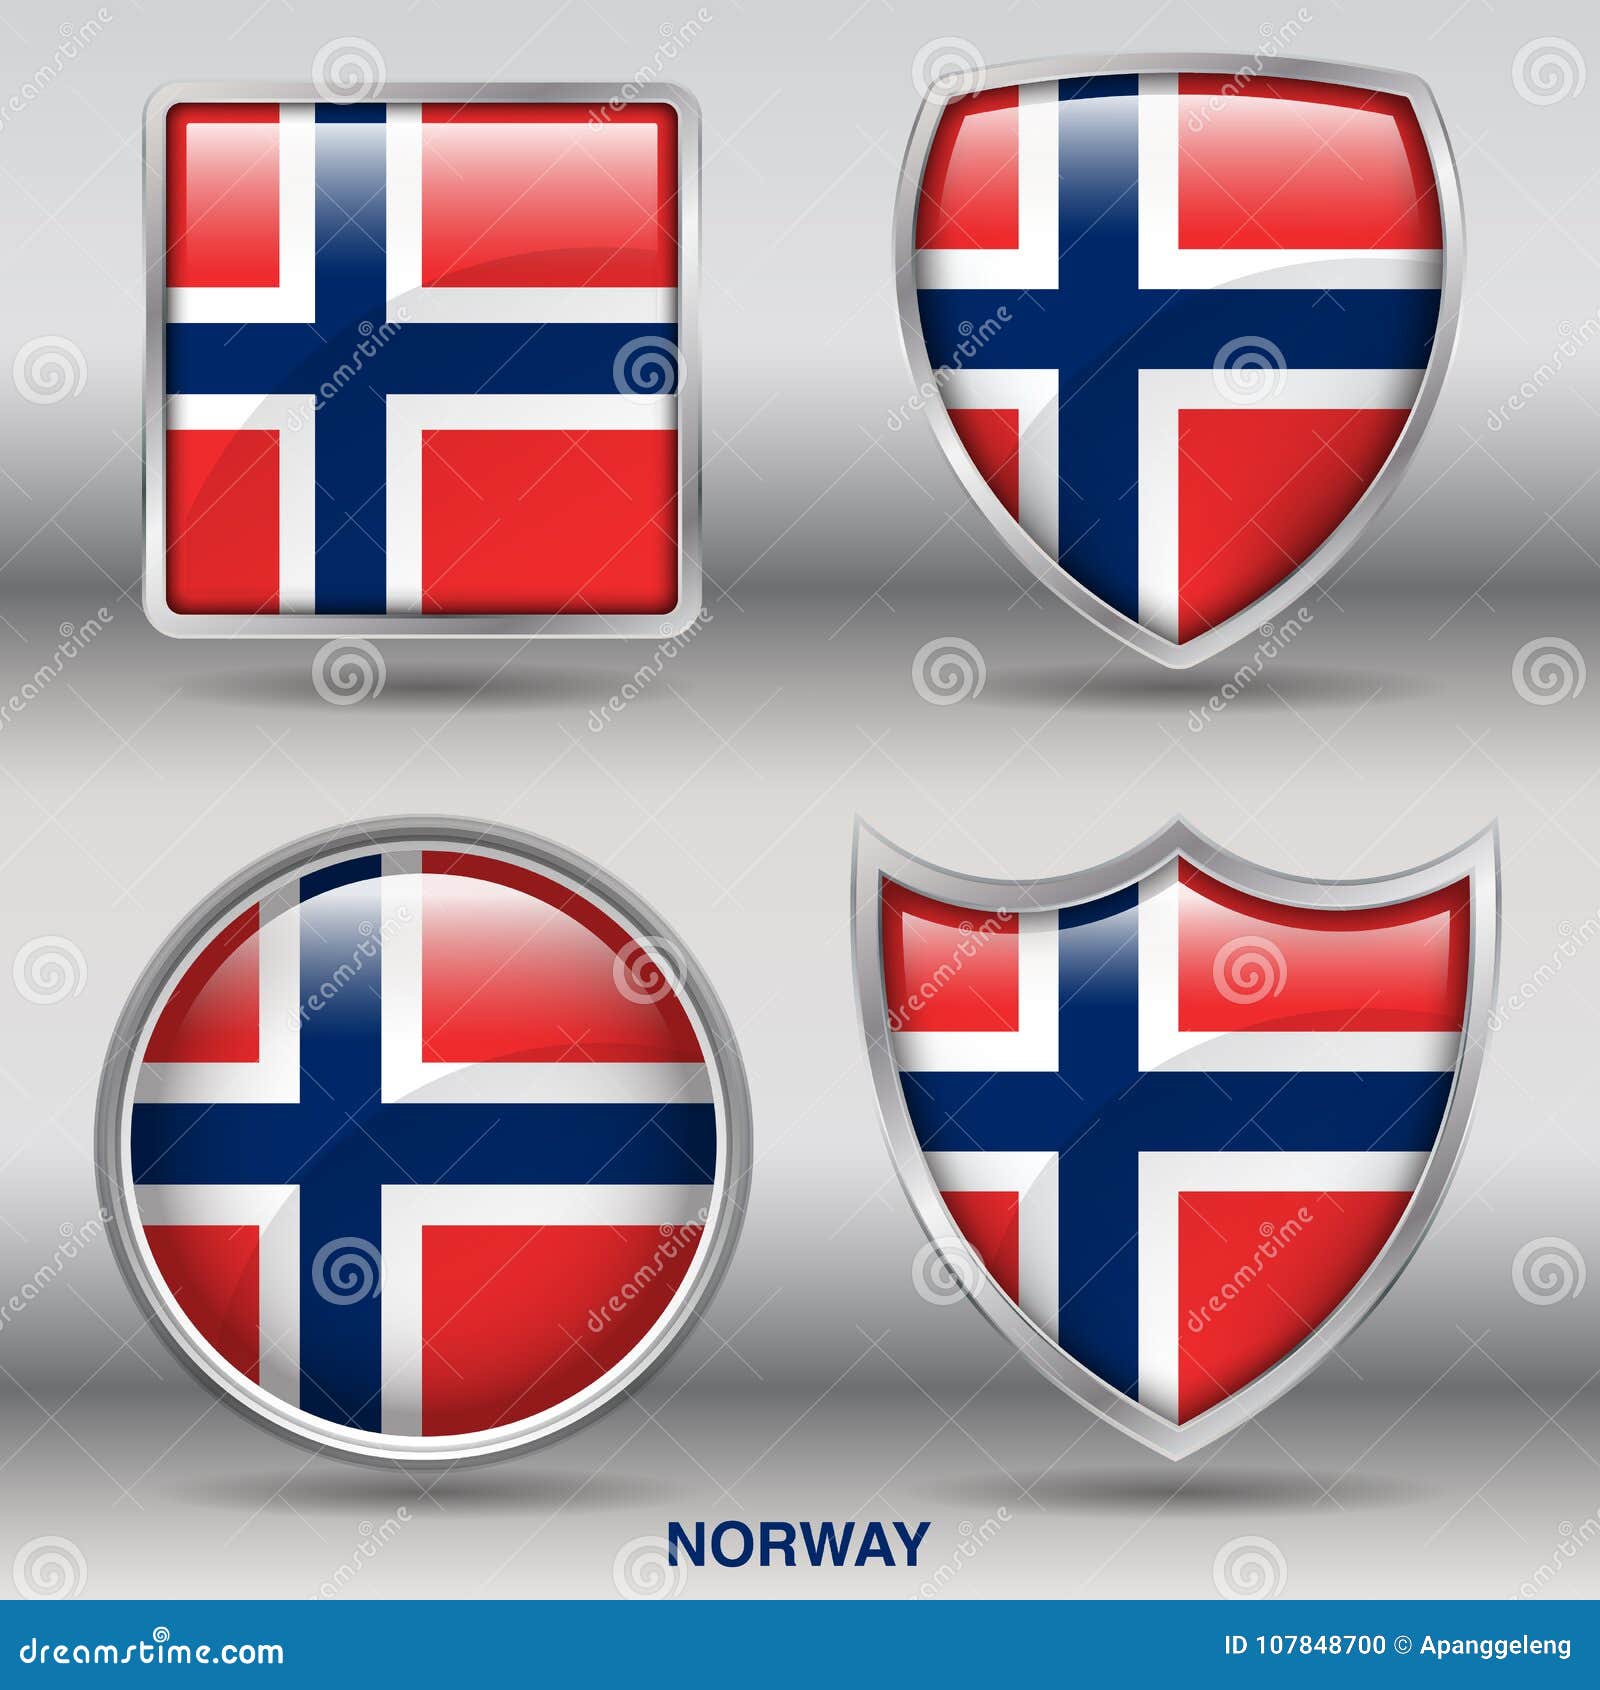 Download Norway Flag In 4 Shapes Collection With Clipping Path ...